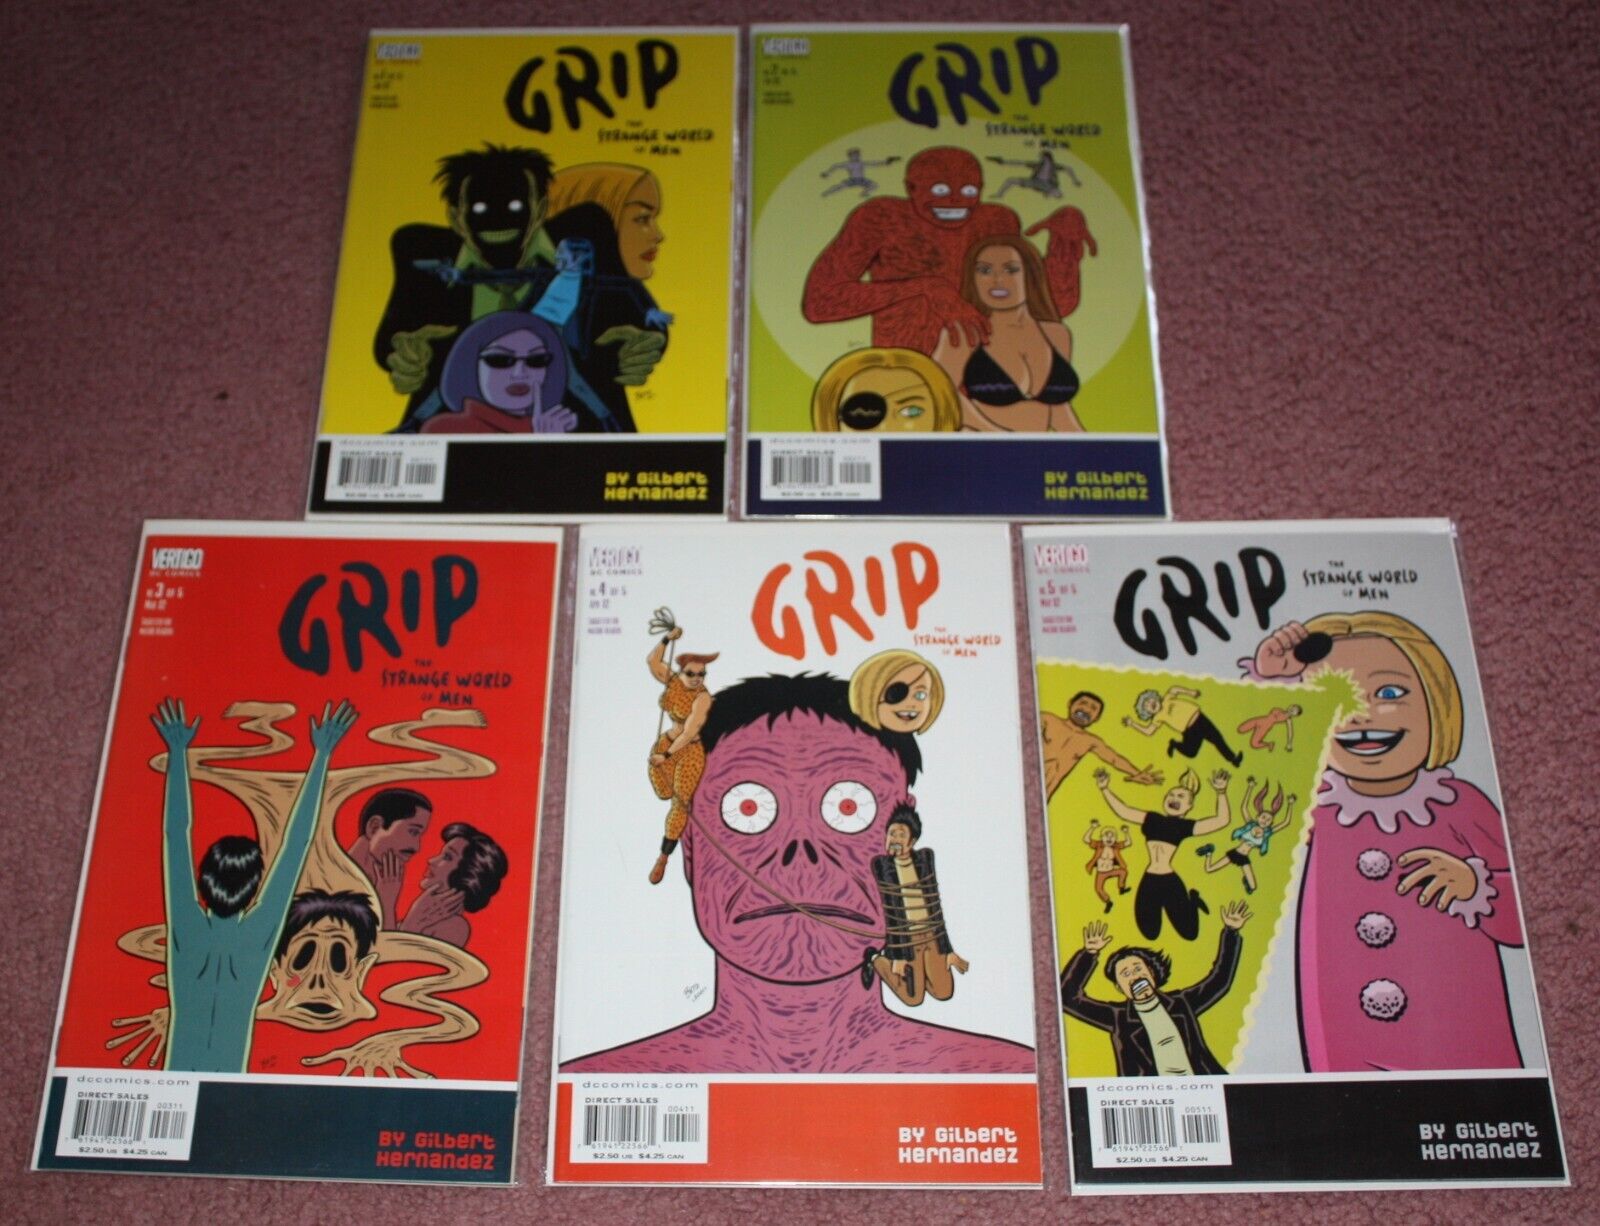 GRIP THE STRANGE WORLD OF MEN COMIC BOOK, COMPLETE SERIES ISSUES  1-5